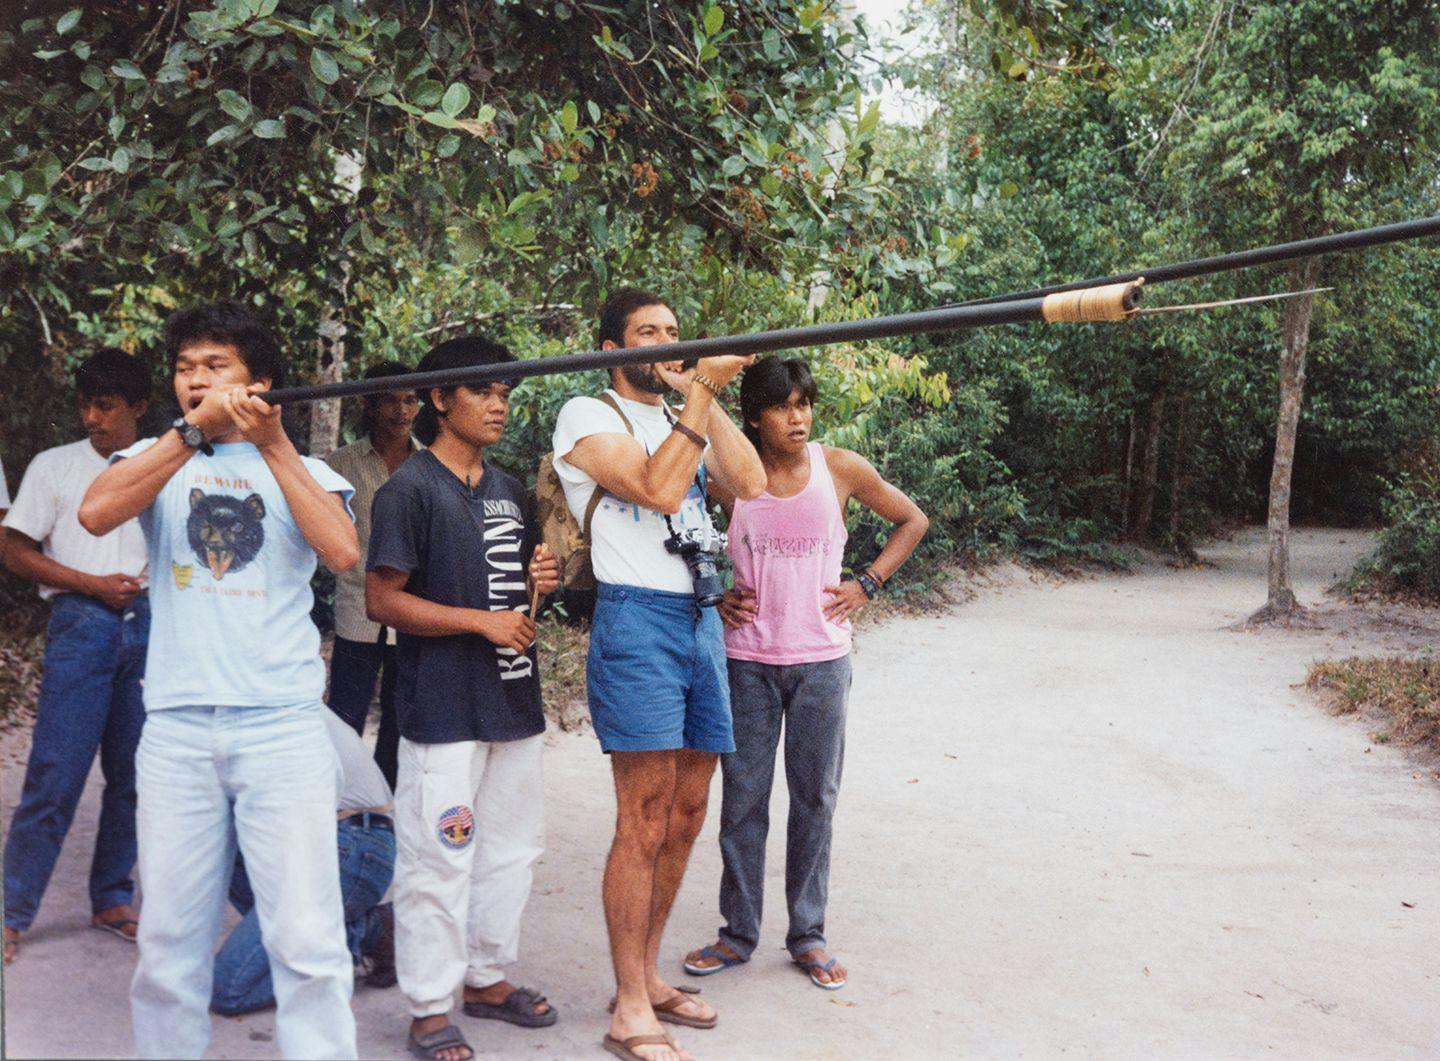 On our last morning, they taught us how to use the blowguns.